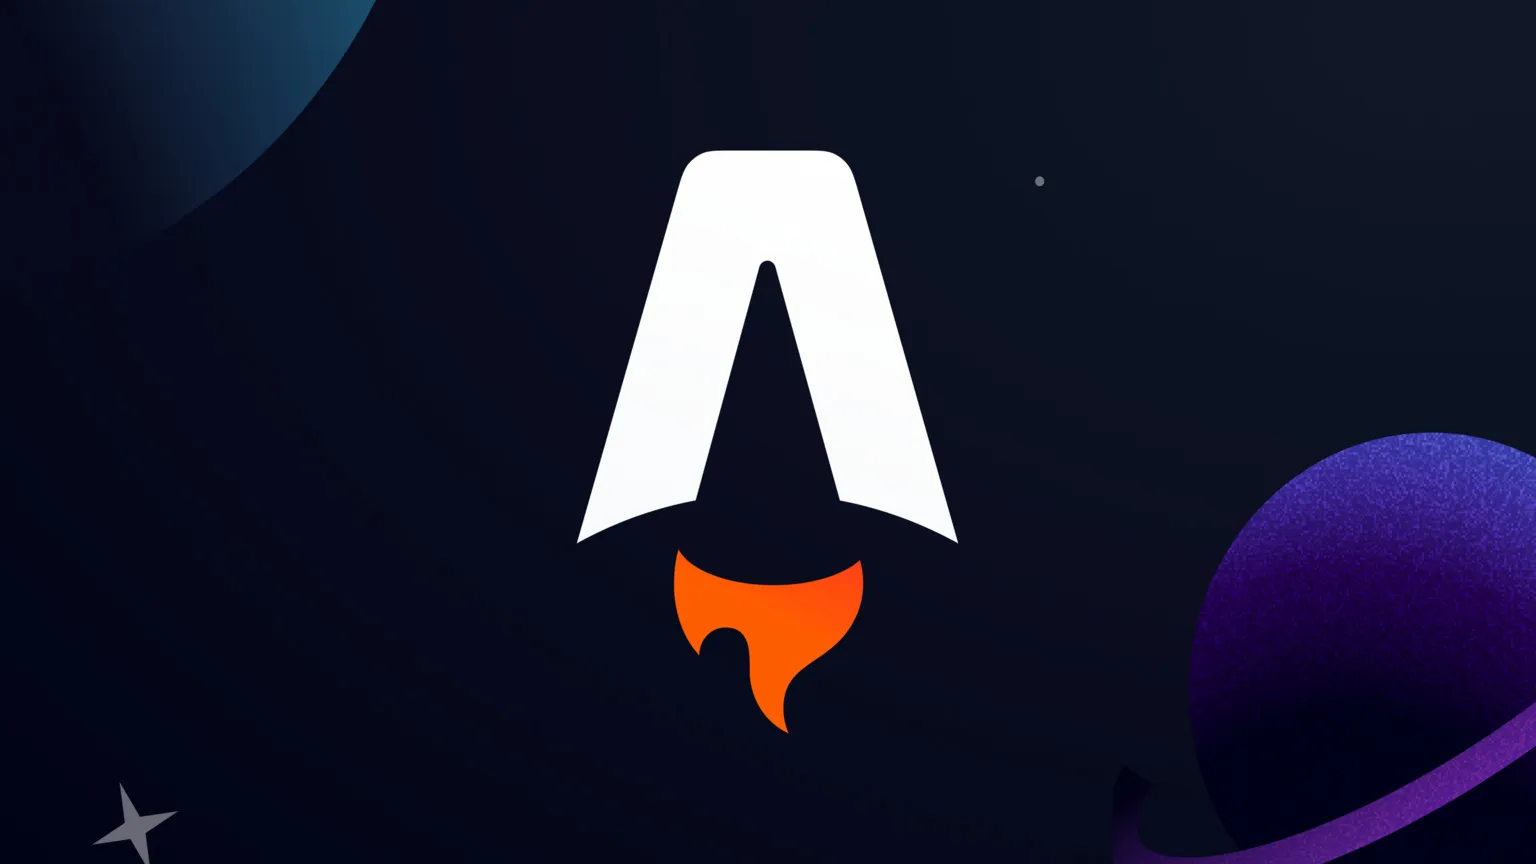 Astro's logo displayed over a space-themed background